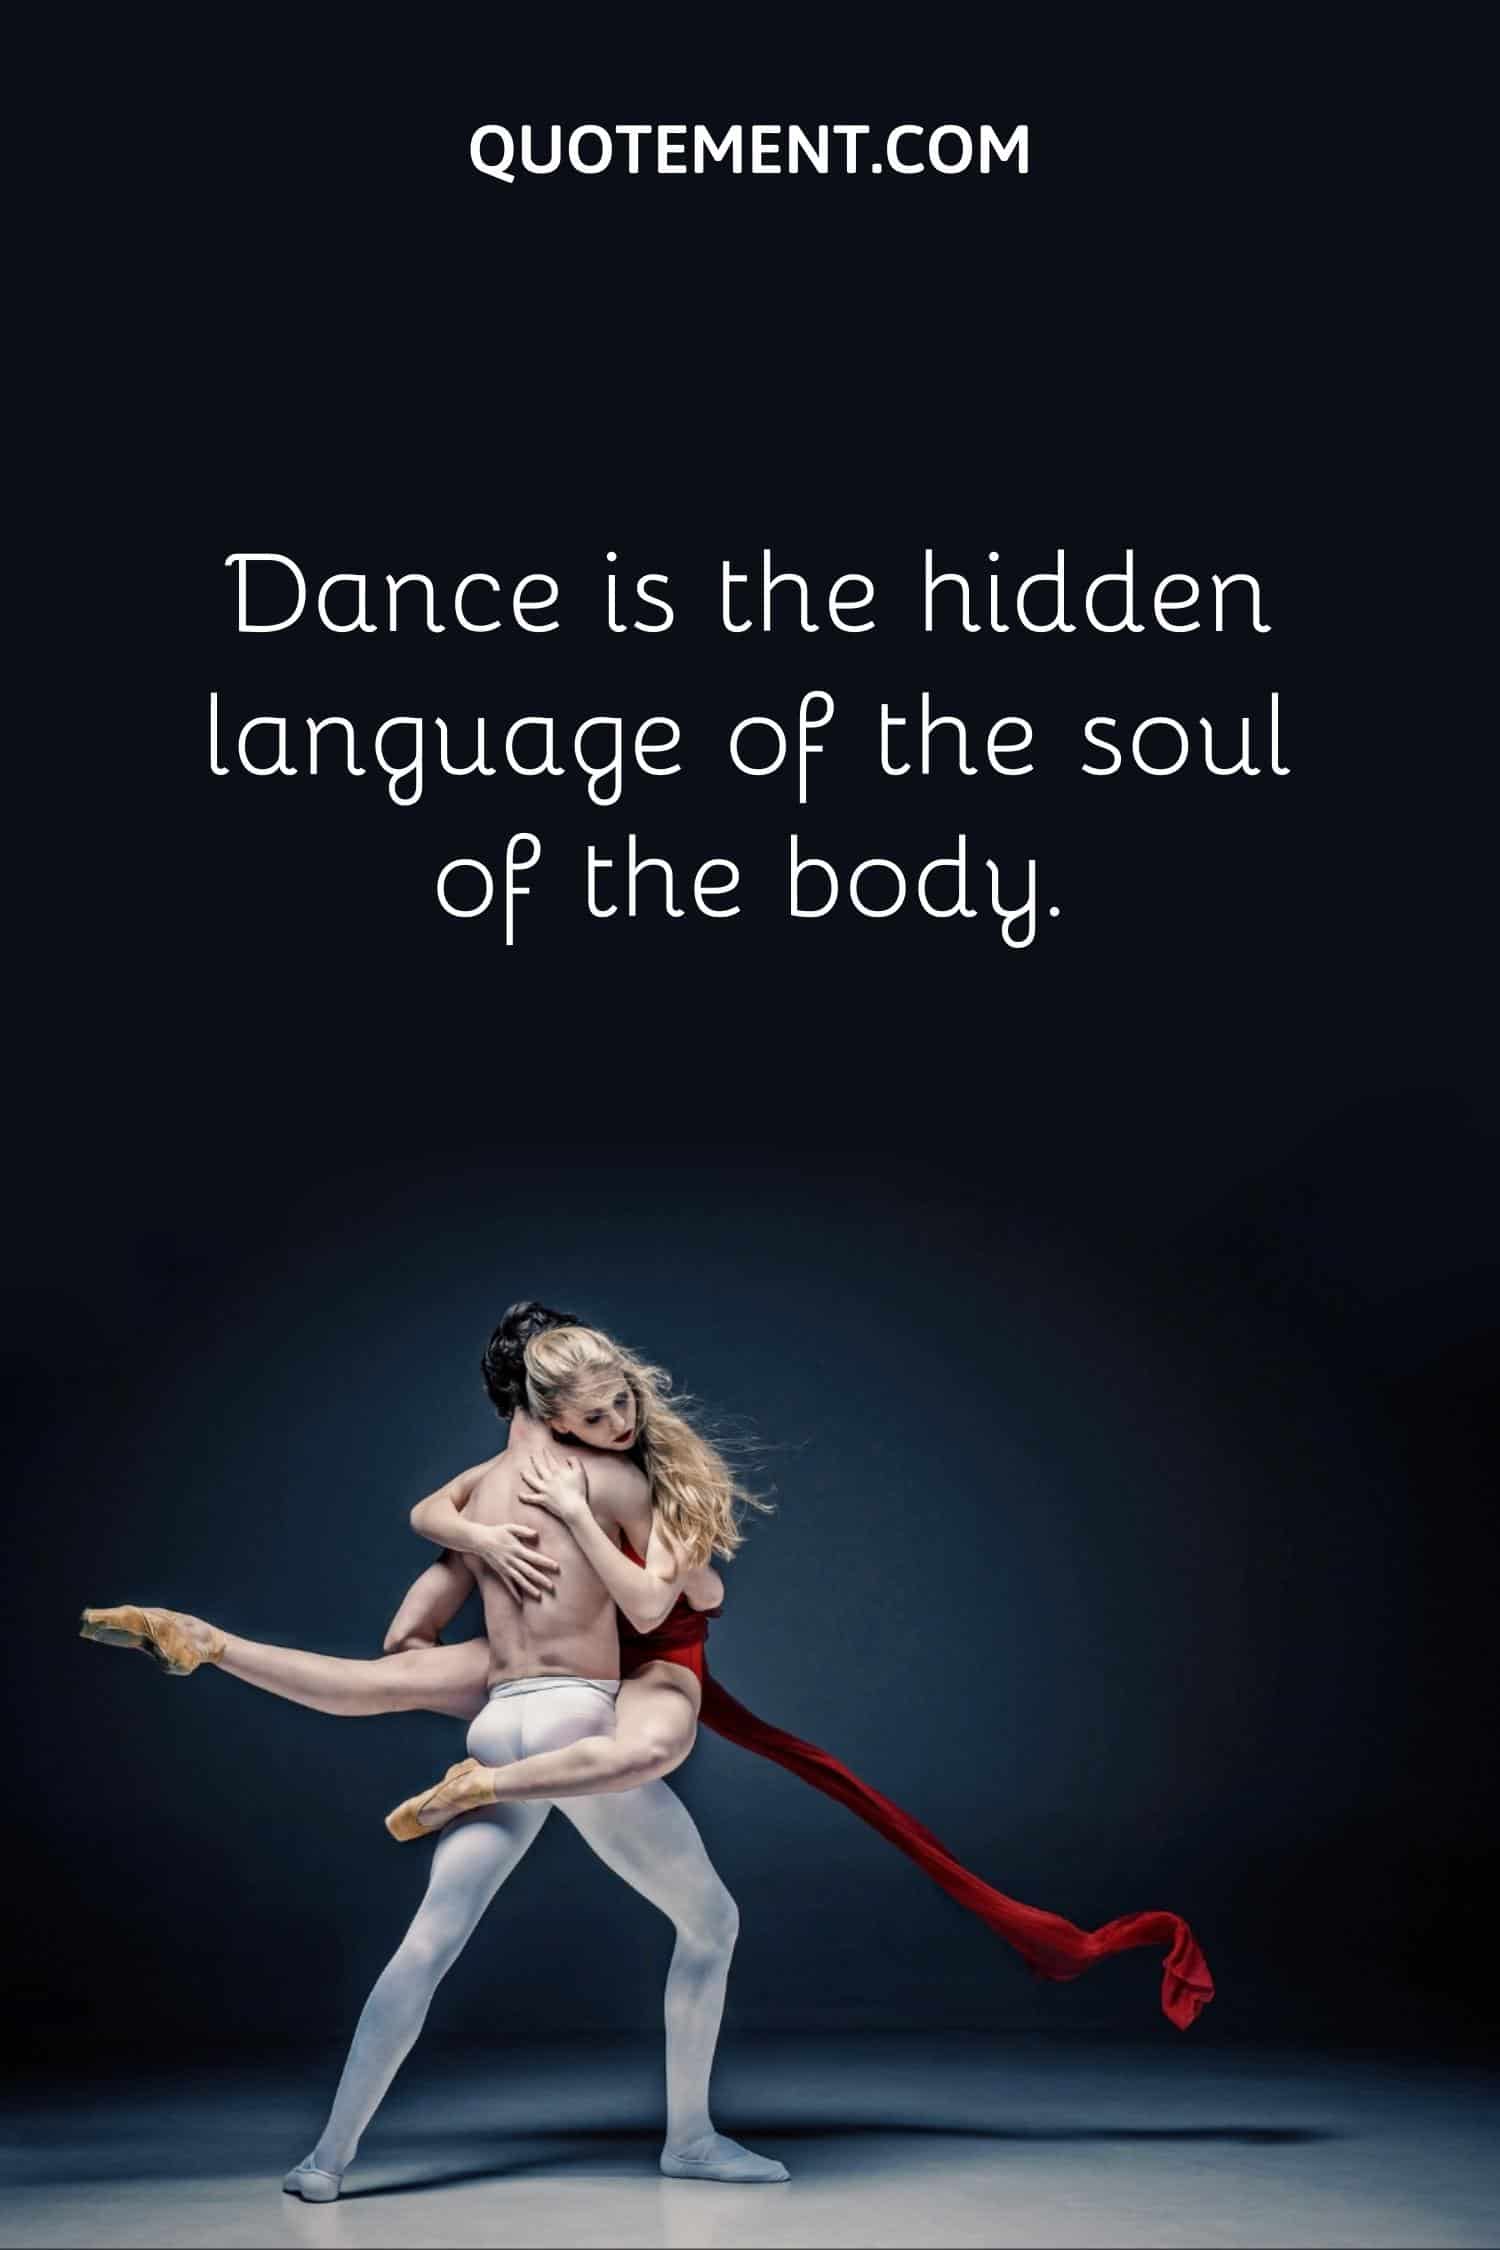 Dance is the hidden language of the soul of the body